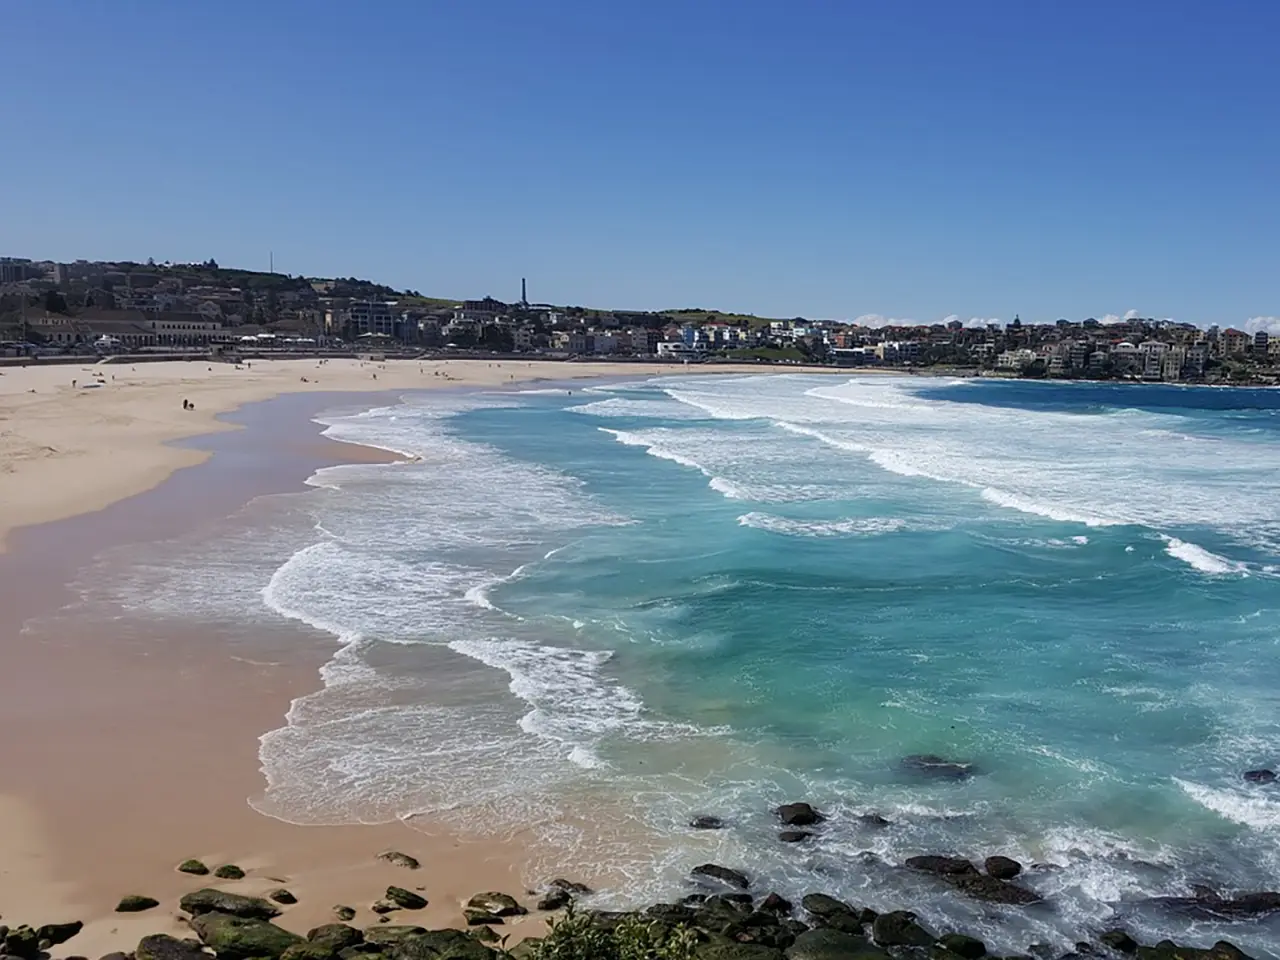 Bondi Beach, Sydney - One of the most well-known beaches in the world may be found there thanks to the combination of tanned bodies, blonde sand, backpackers, and surf.